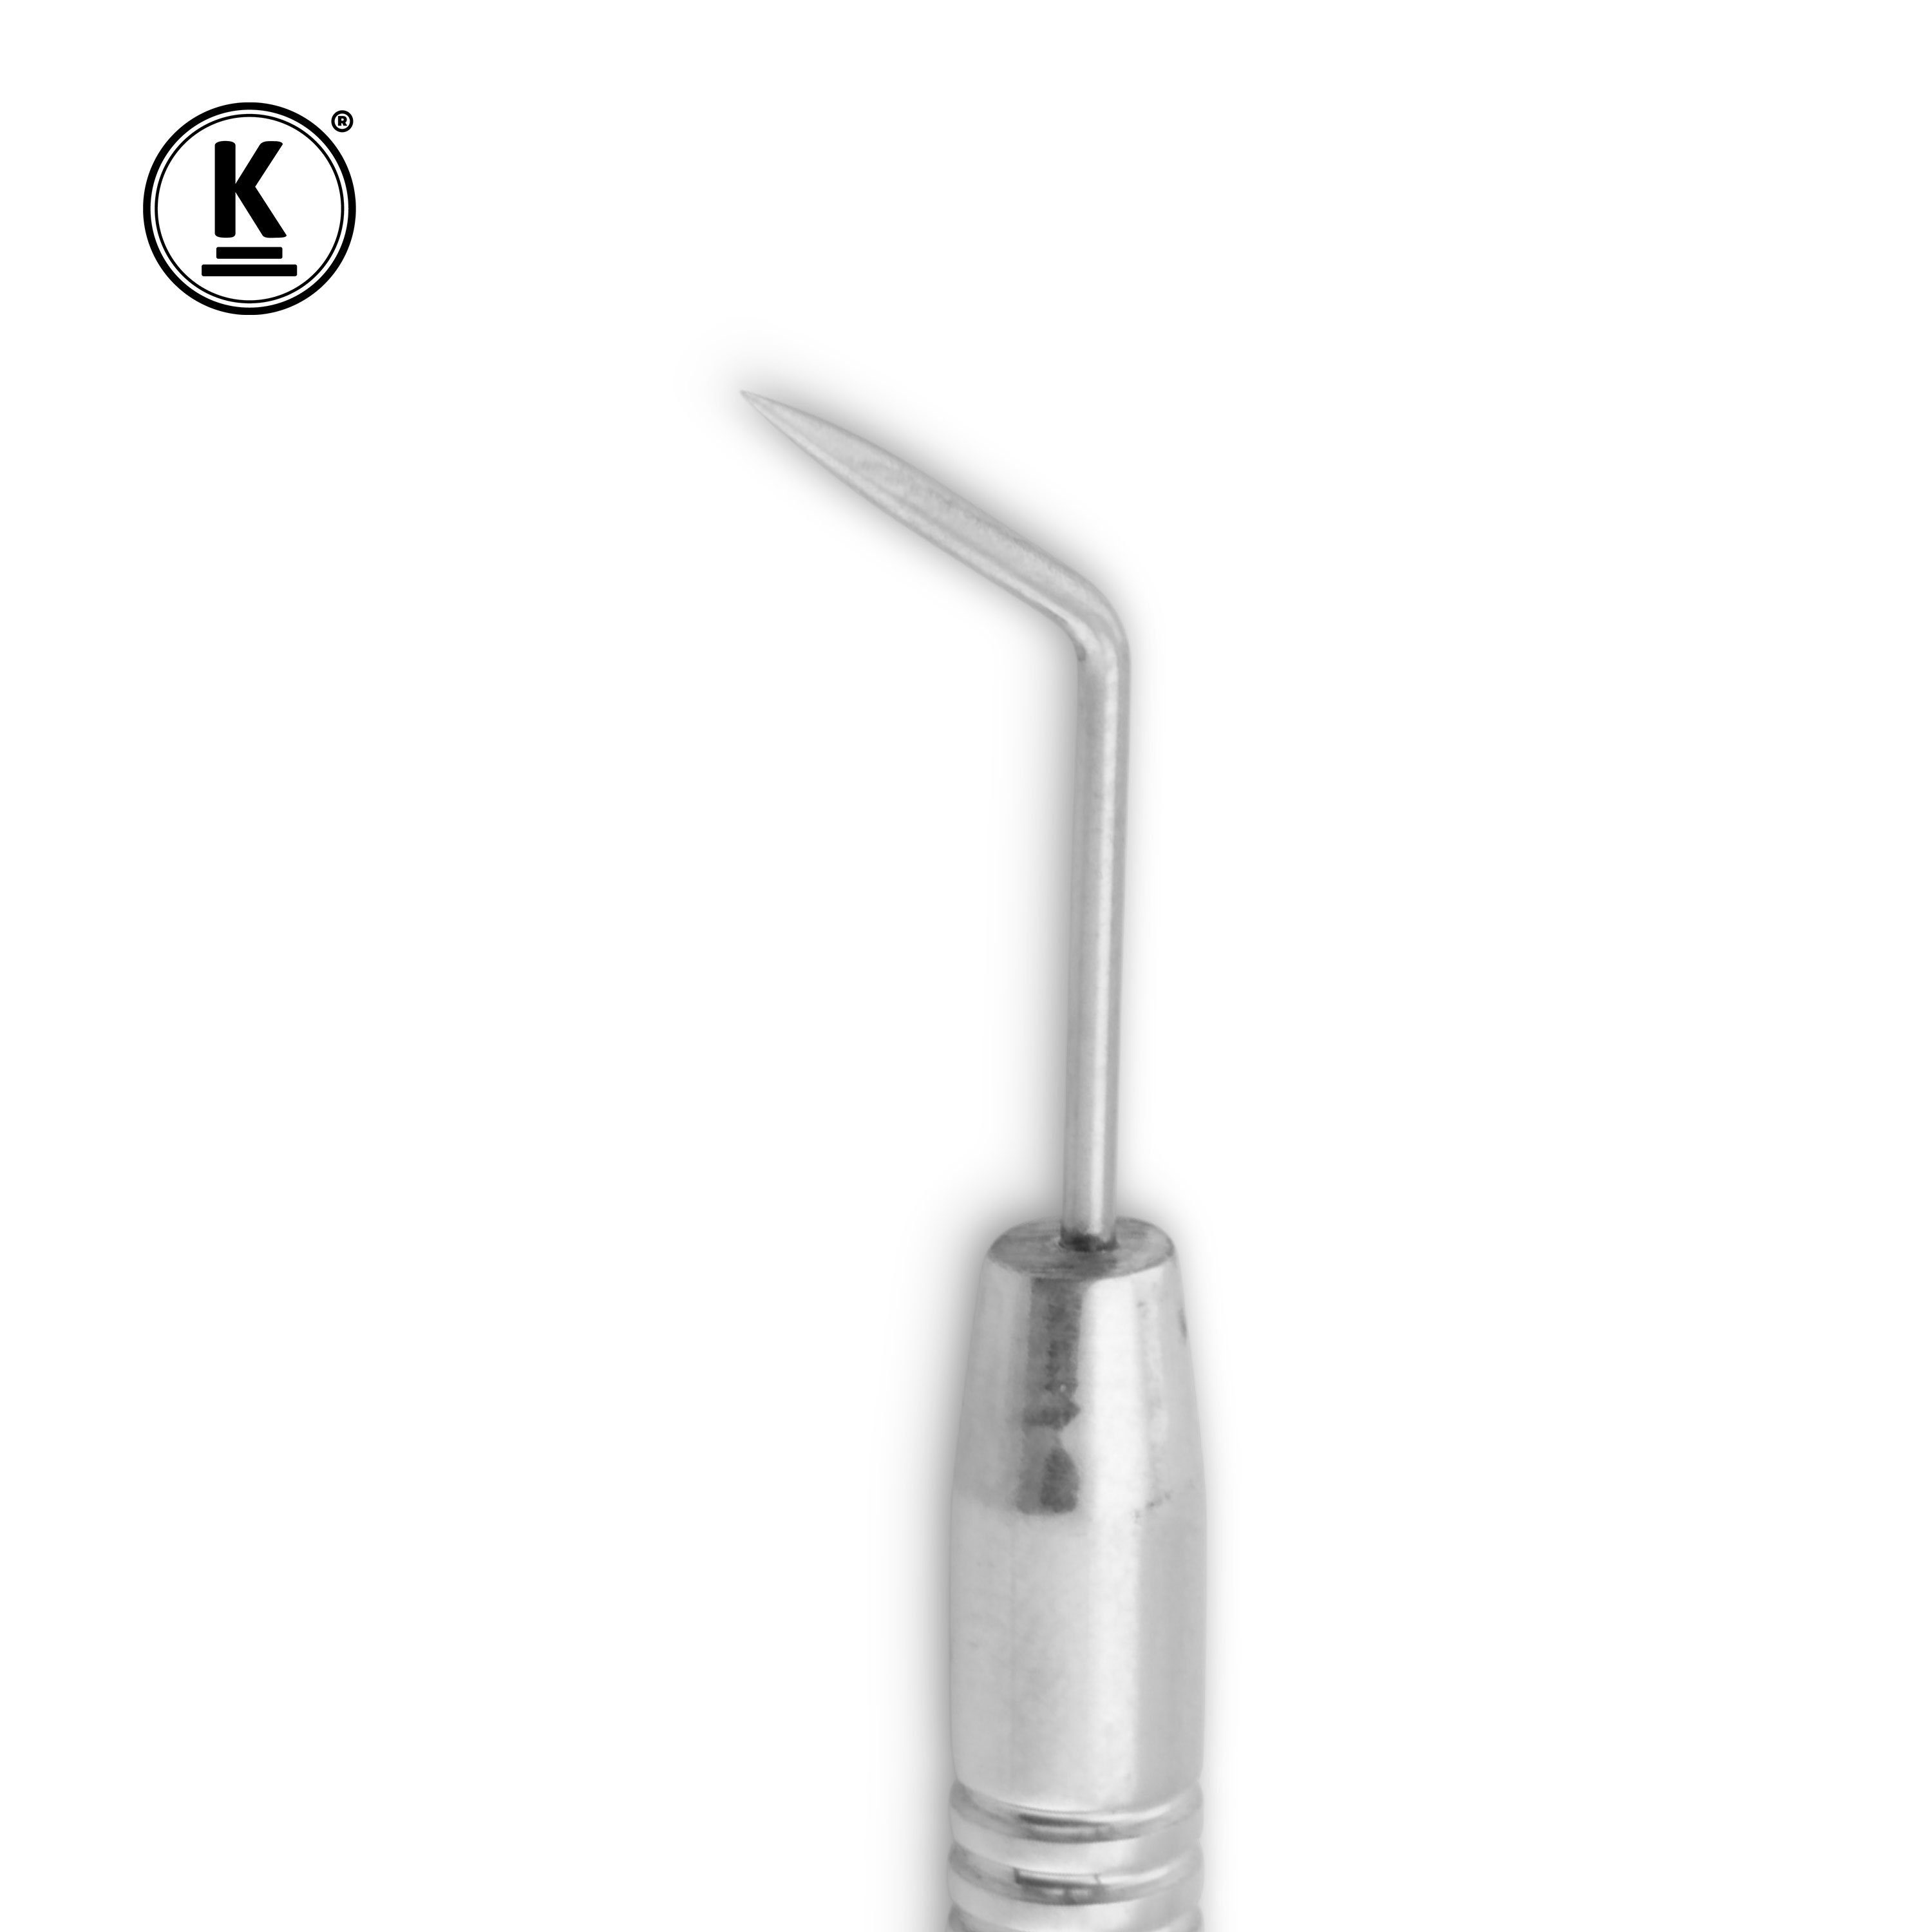 K-Pro Wimpernkamm Lifting Wimpern - Seperator Kamm Wimpernlifting & Tool